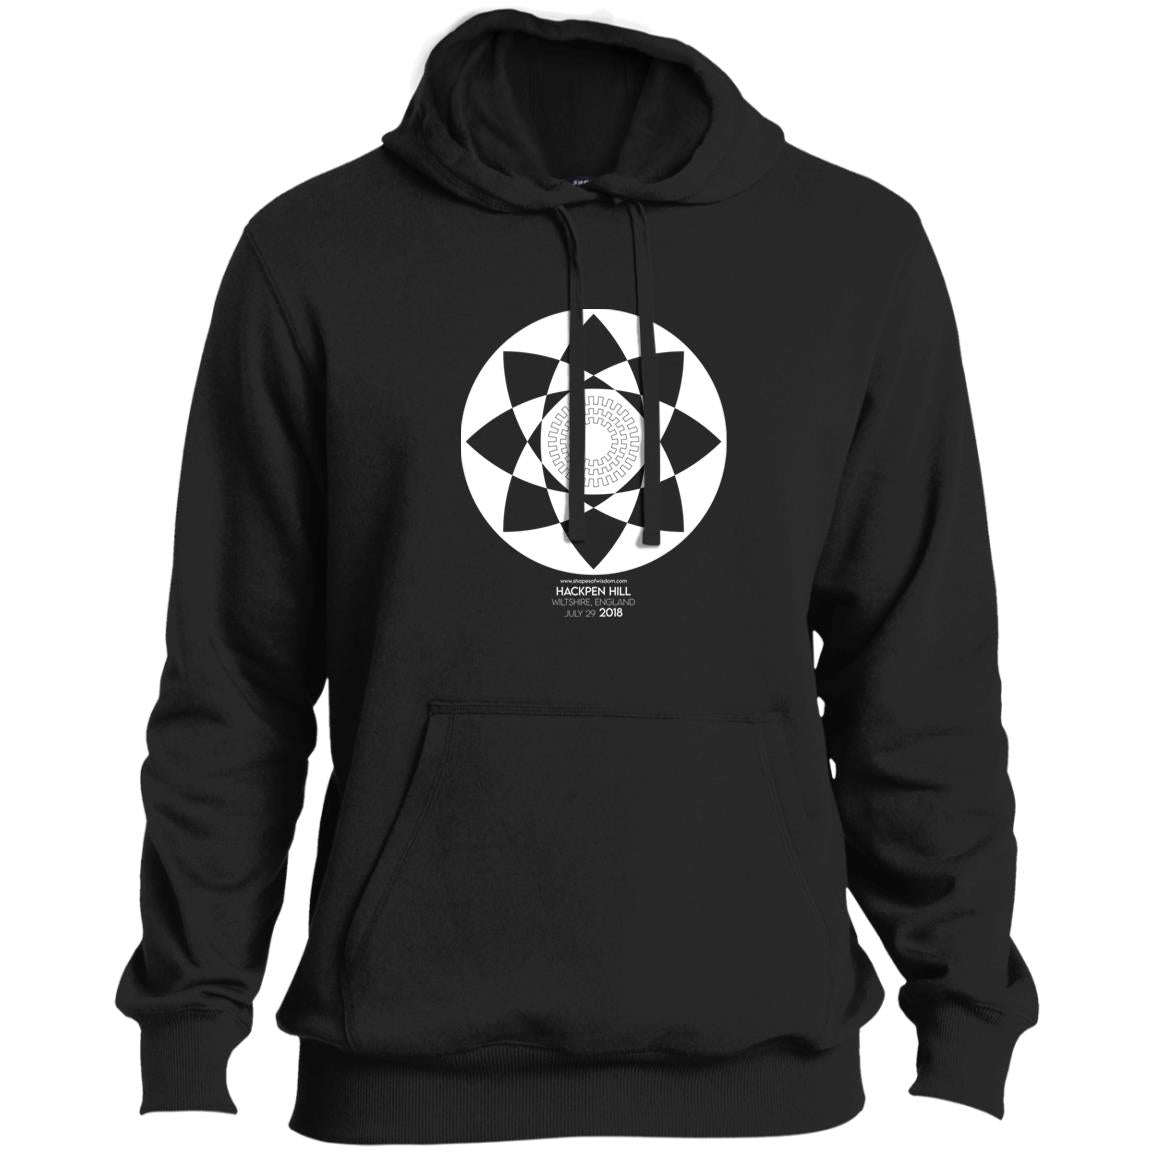 Crop Circle Pullover Hoodie - Hackpen Hill 3